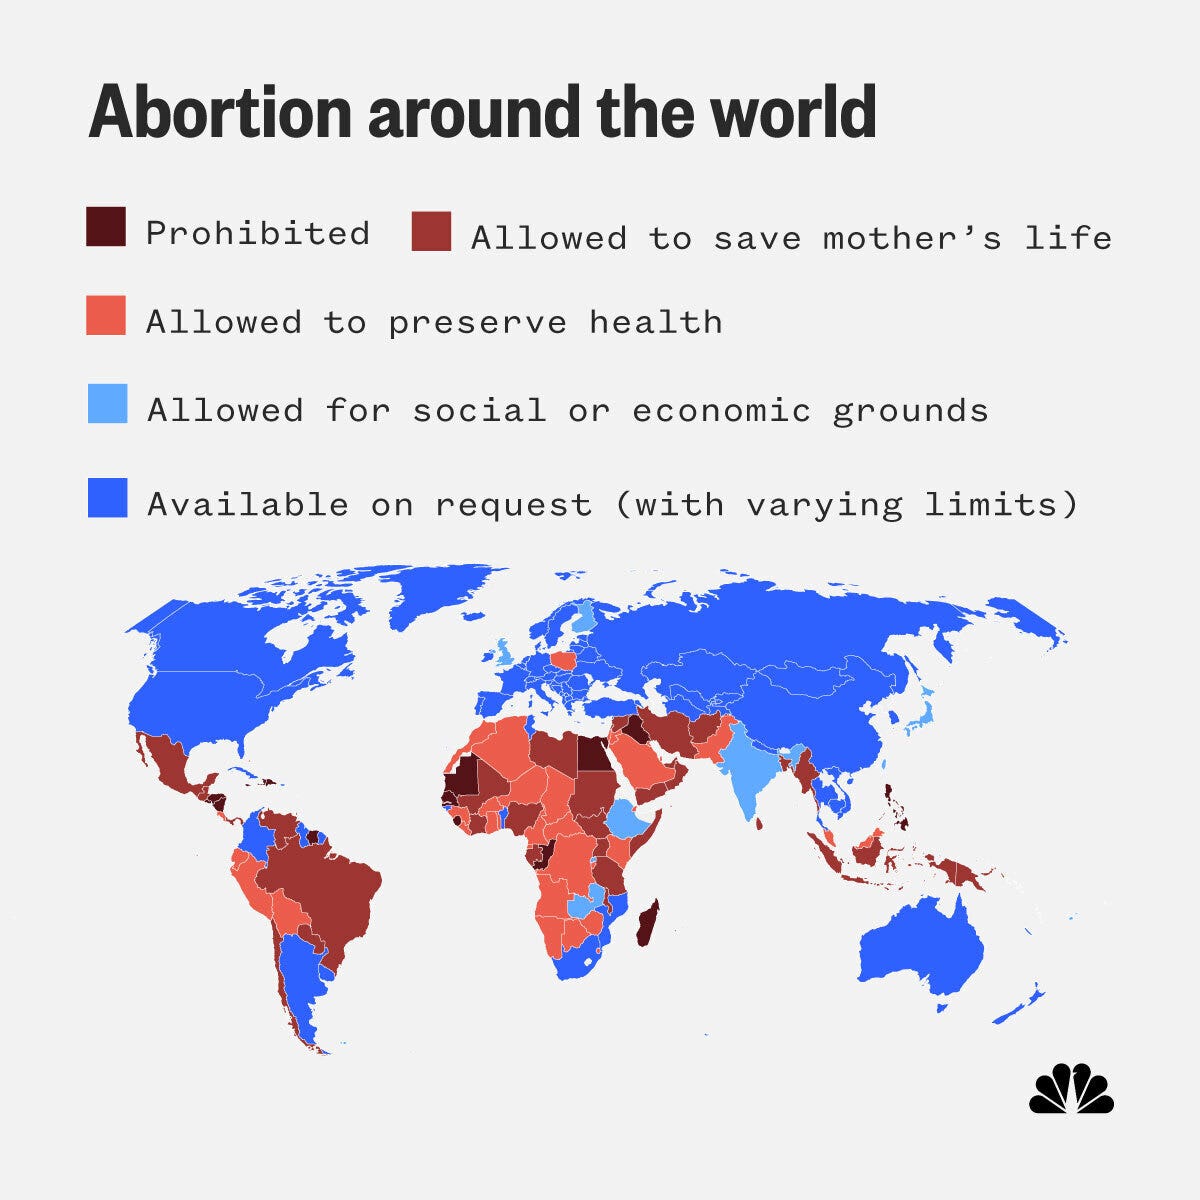 NBC News on X: "Abortion laws worldwide: Here's a look at where the  procedure is legal. https://t.co/rqphDVljg9 https://t.co/7EHGTUE6Us" / X